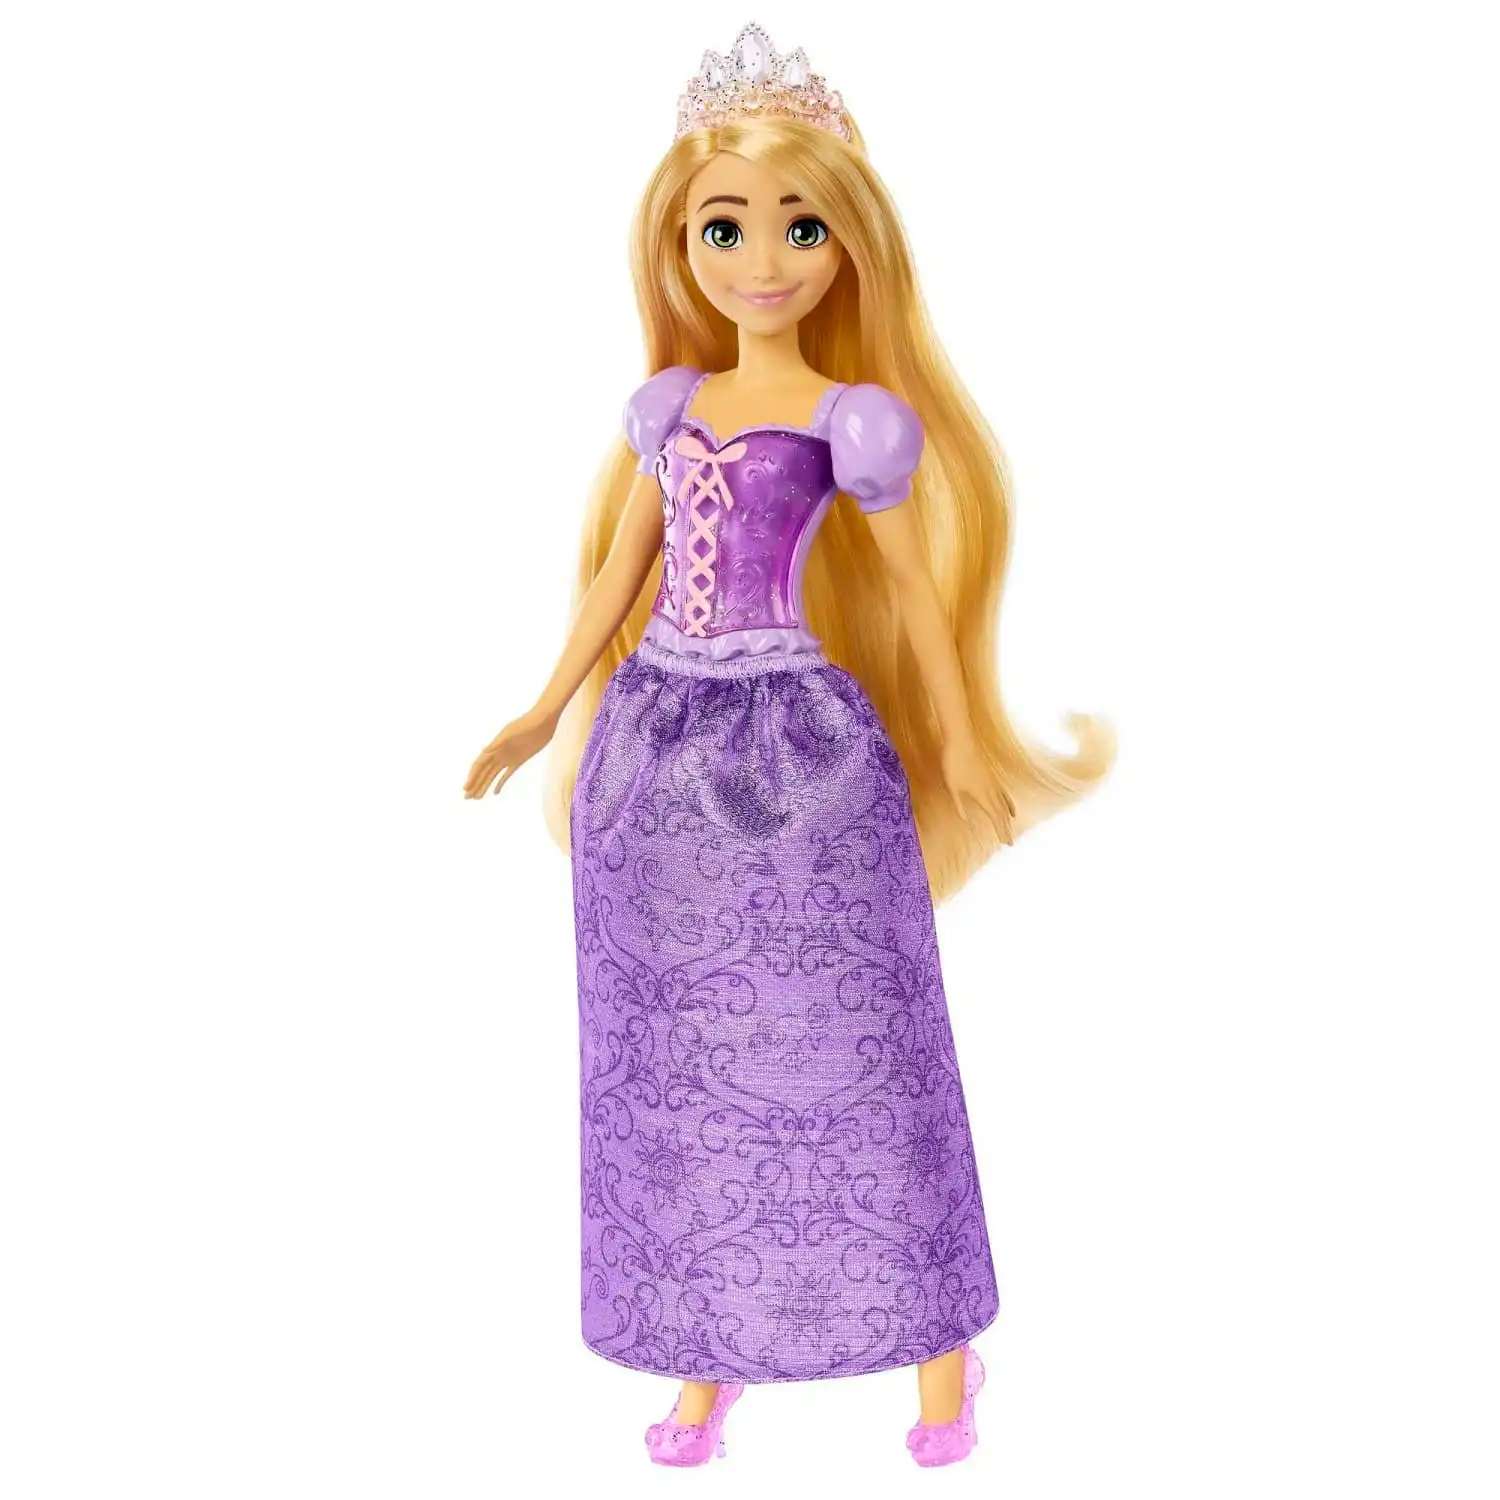 Disney Princess Rapunzel Fashion Doll And Accessories - New For 2023